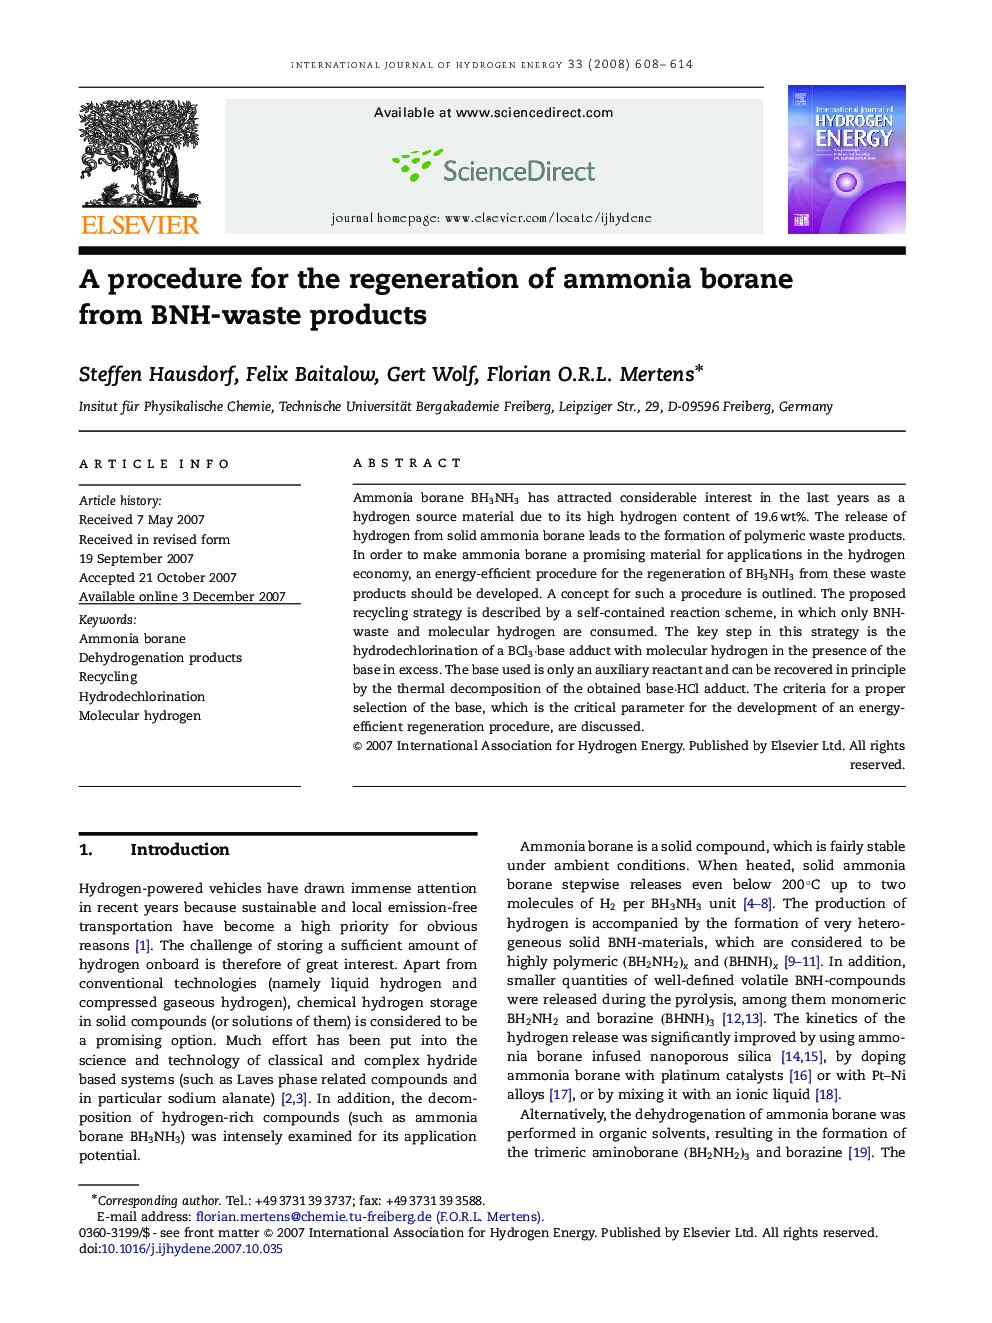 A procedure for the regeneration of ammonia borane from BNH-waste products